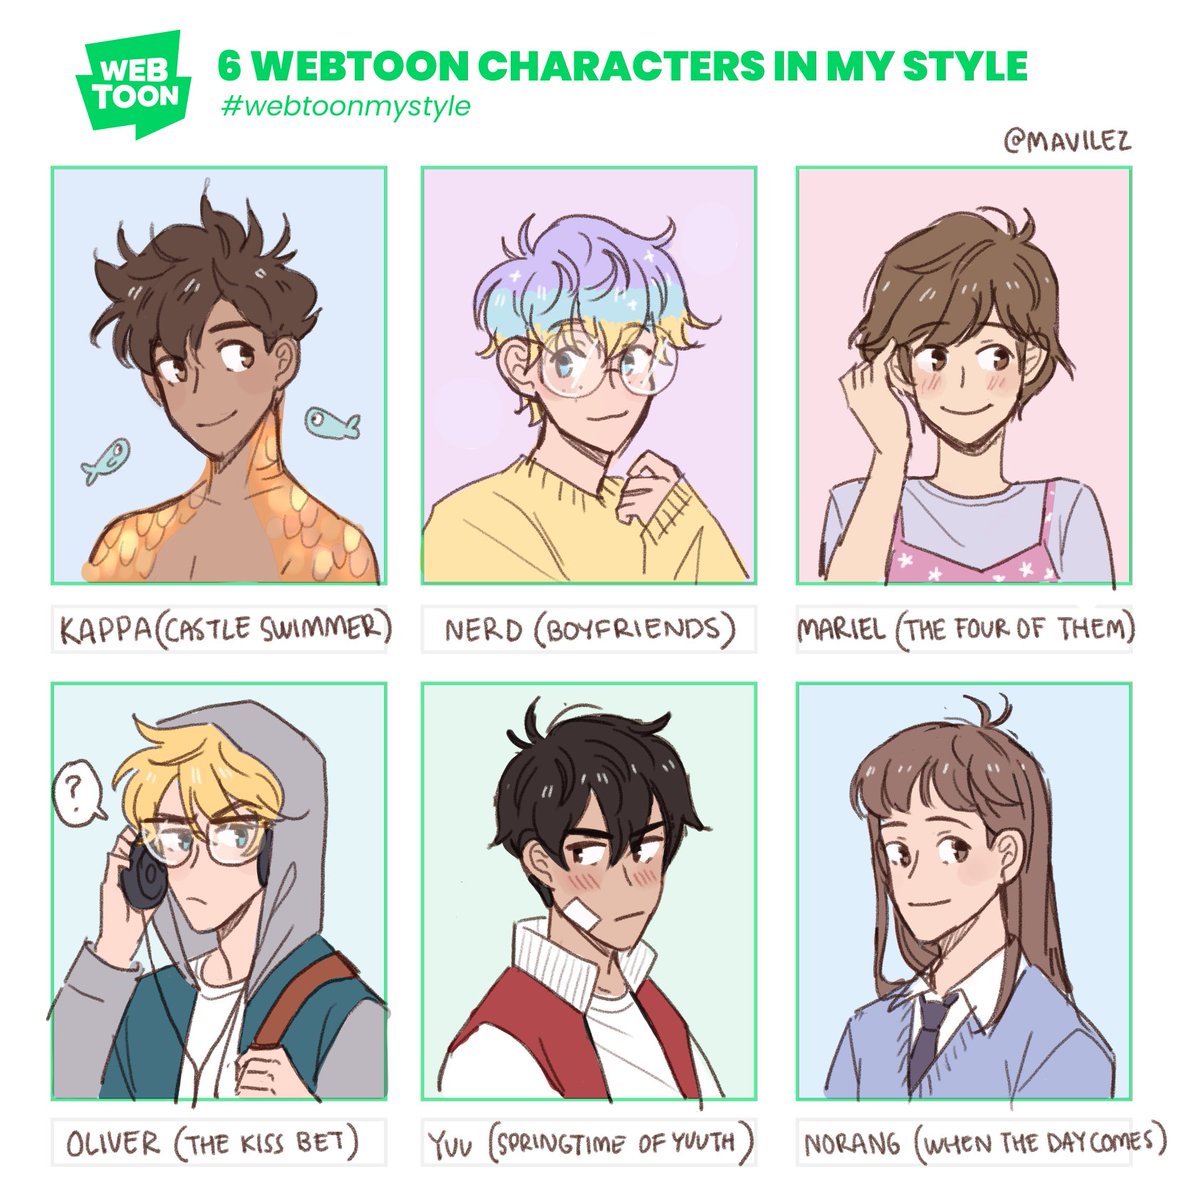 joining this! i love webtoons and wanted to show some appreciation💚
#webtoonmystyle @webtoonofficial 